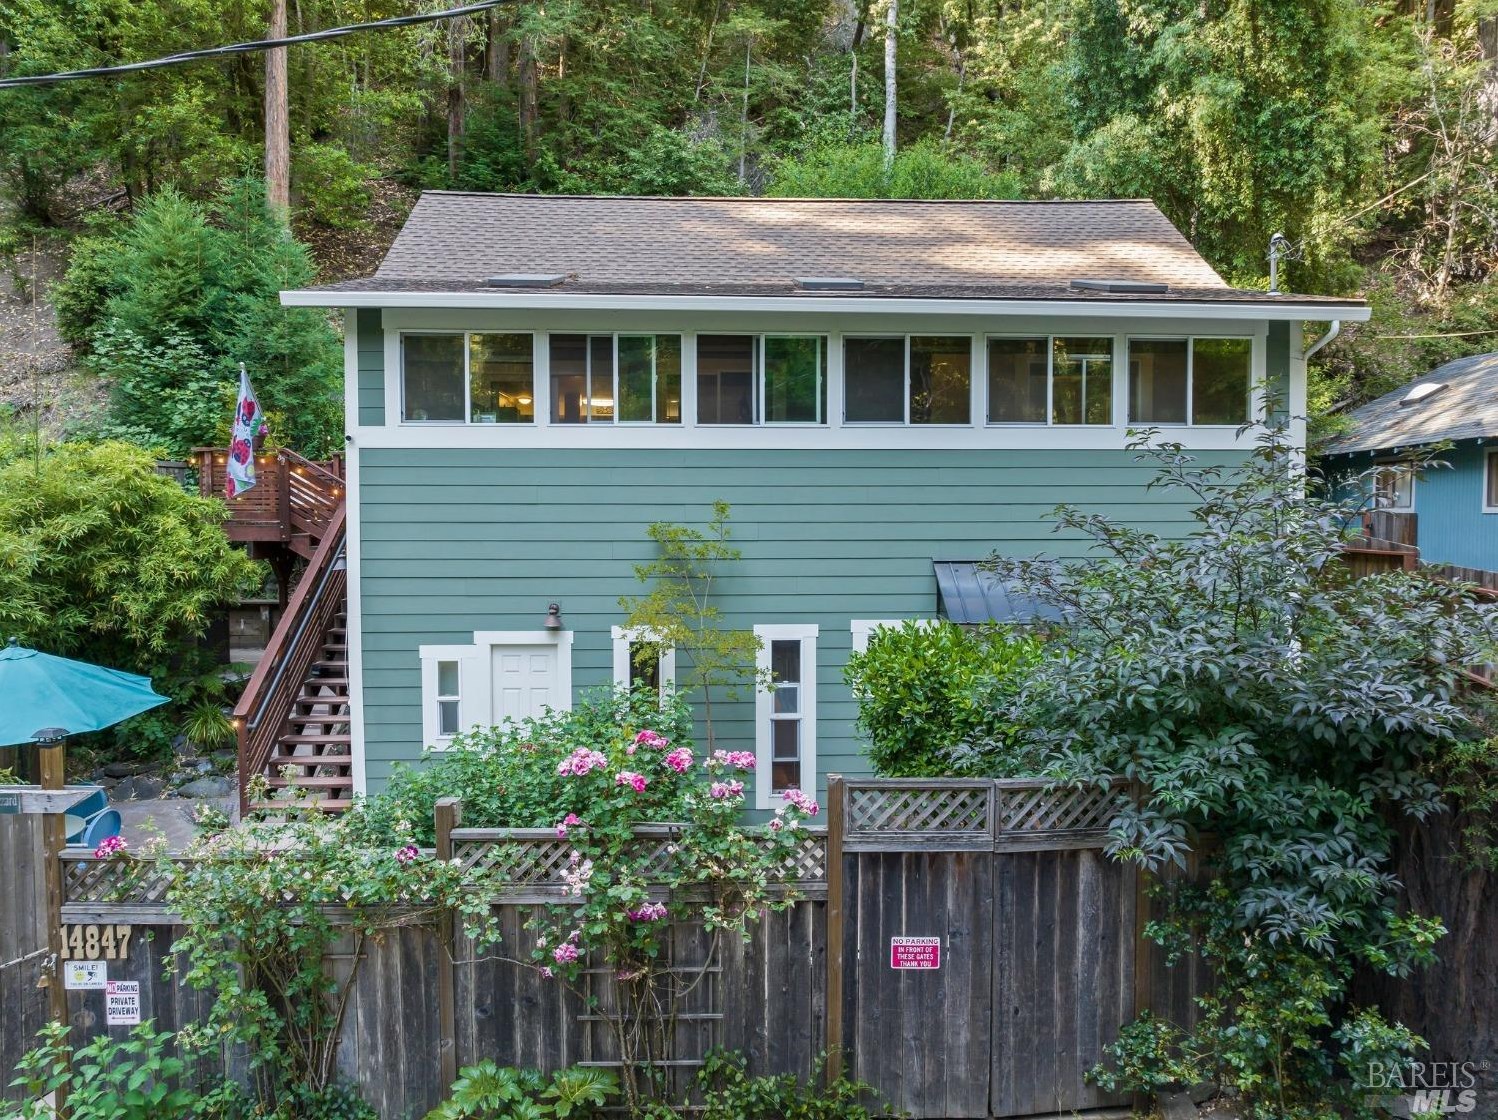 14847 Old Cazadero Rd, Guernewood, CA 95446